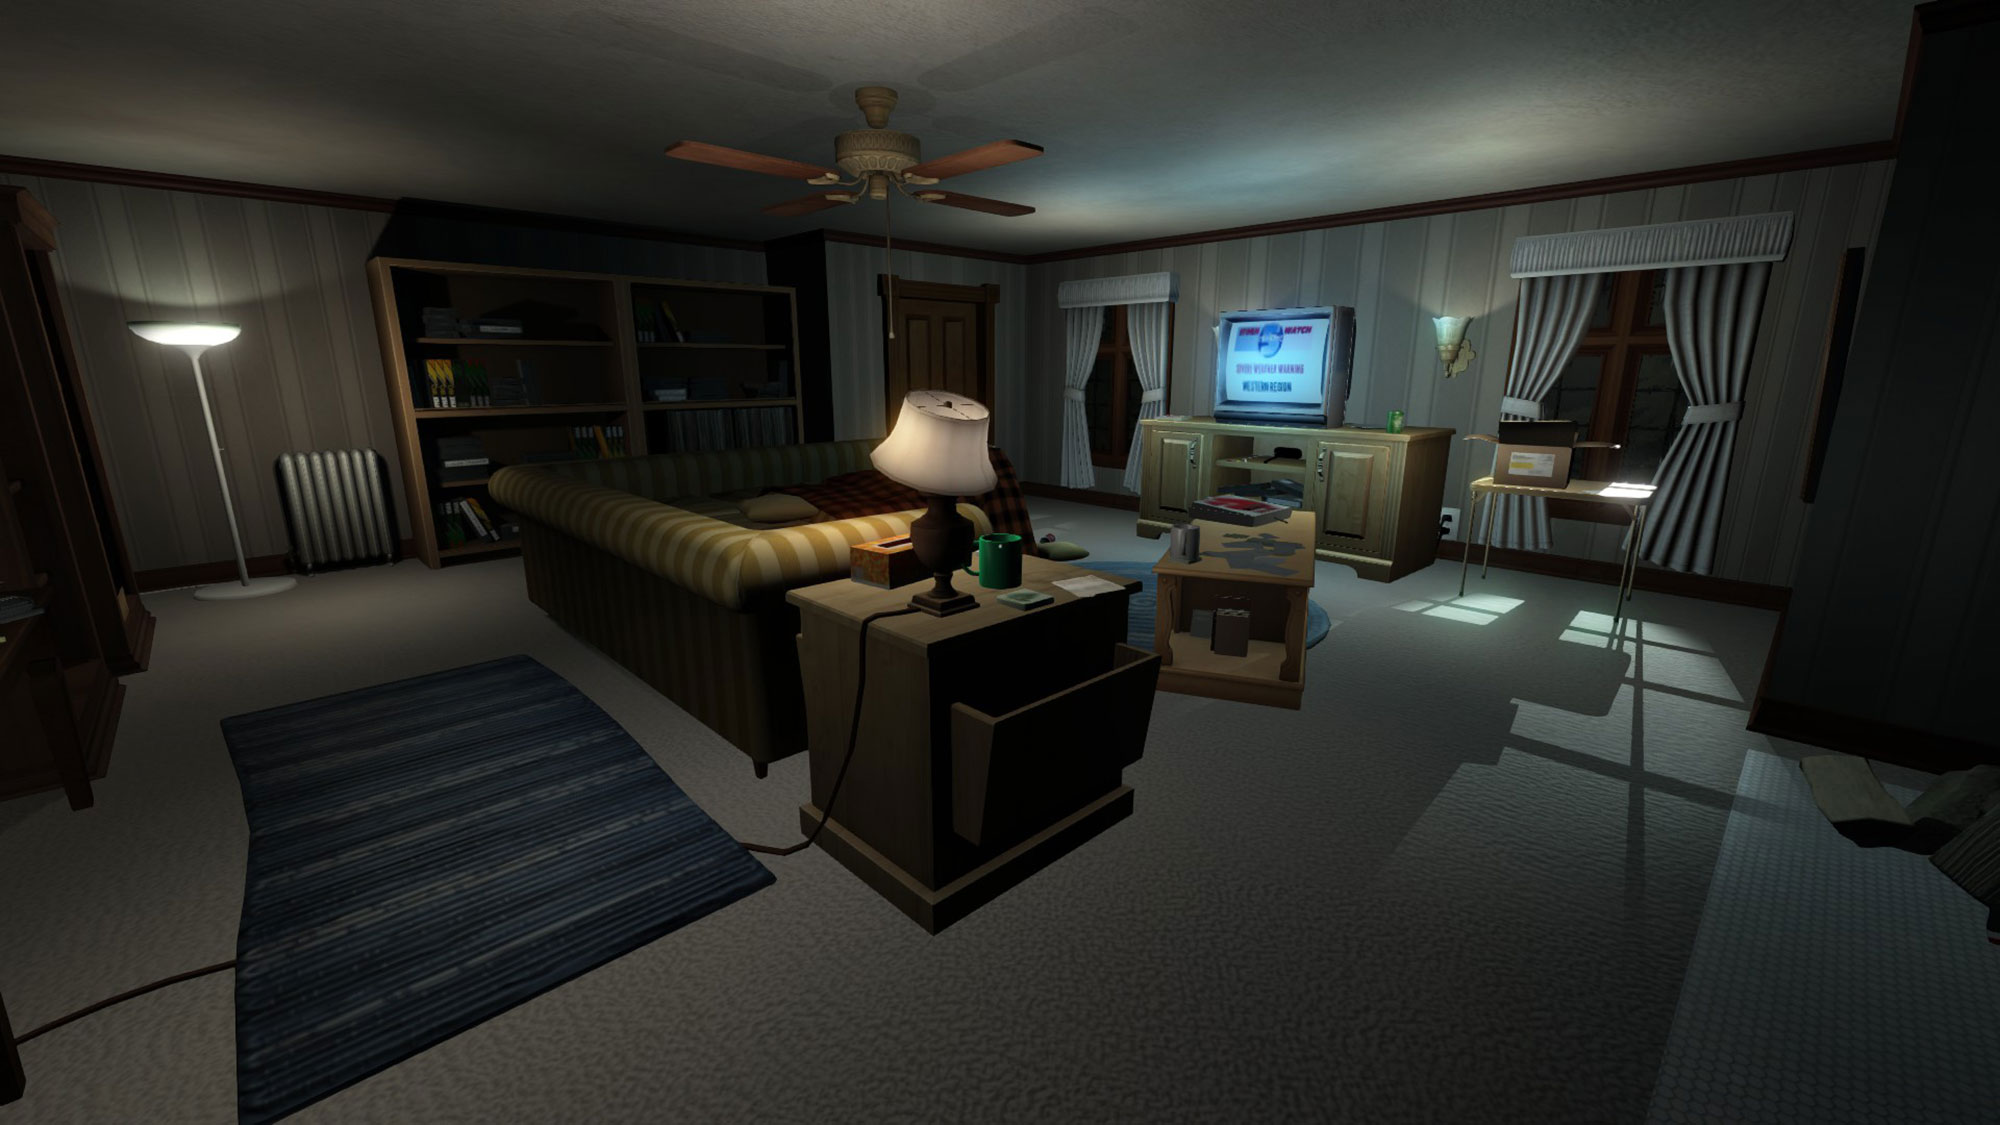 Gone home игра. Gone Home ps4. Gone Home (2013). Go Home игра. Gone Home игры на ПК.